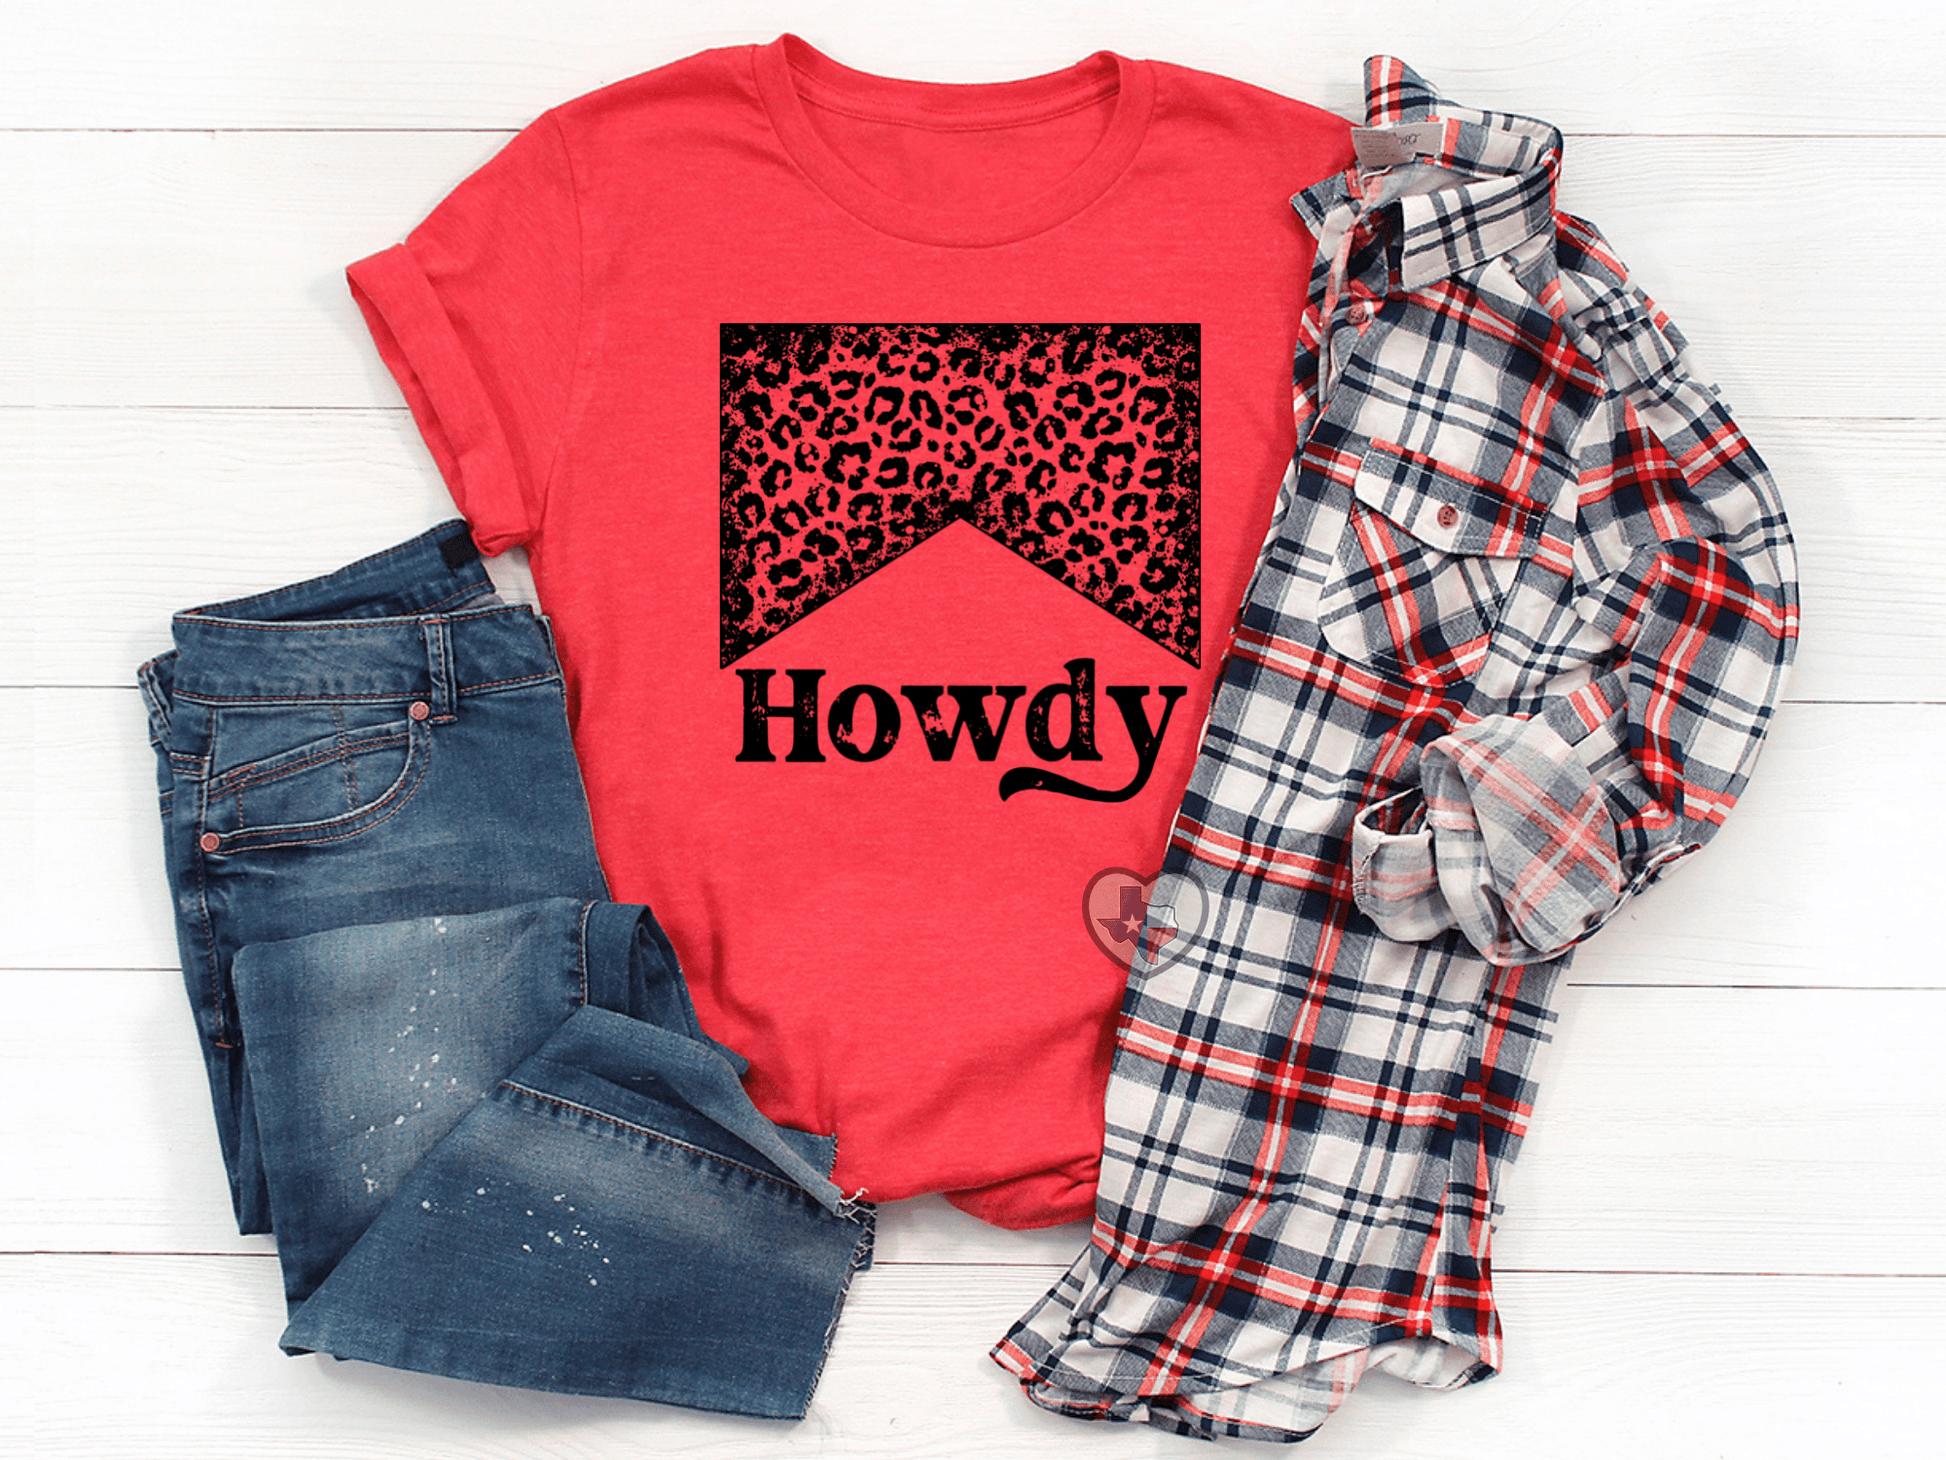 Howdy Leopard - Texas Transfers and Designs